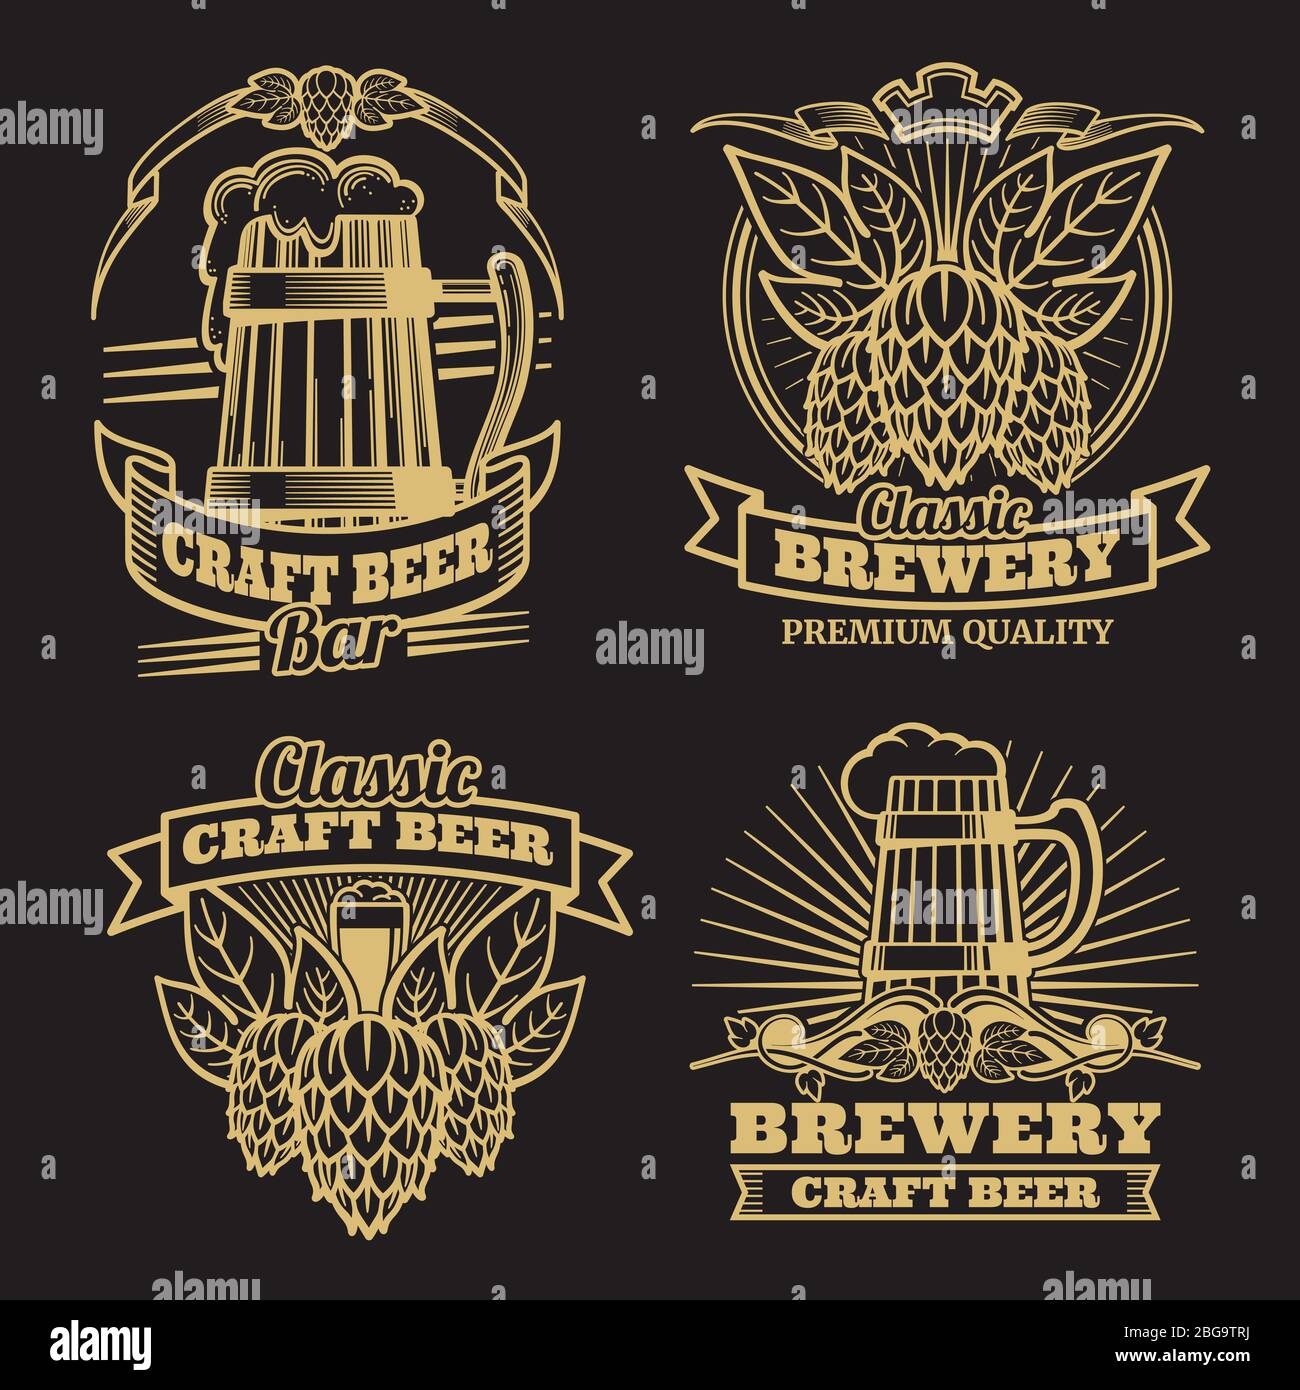 Beer text Stock Vector Images - Alamy